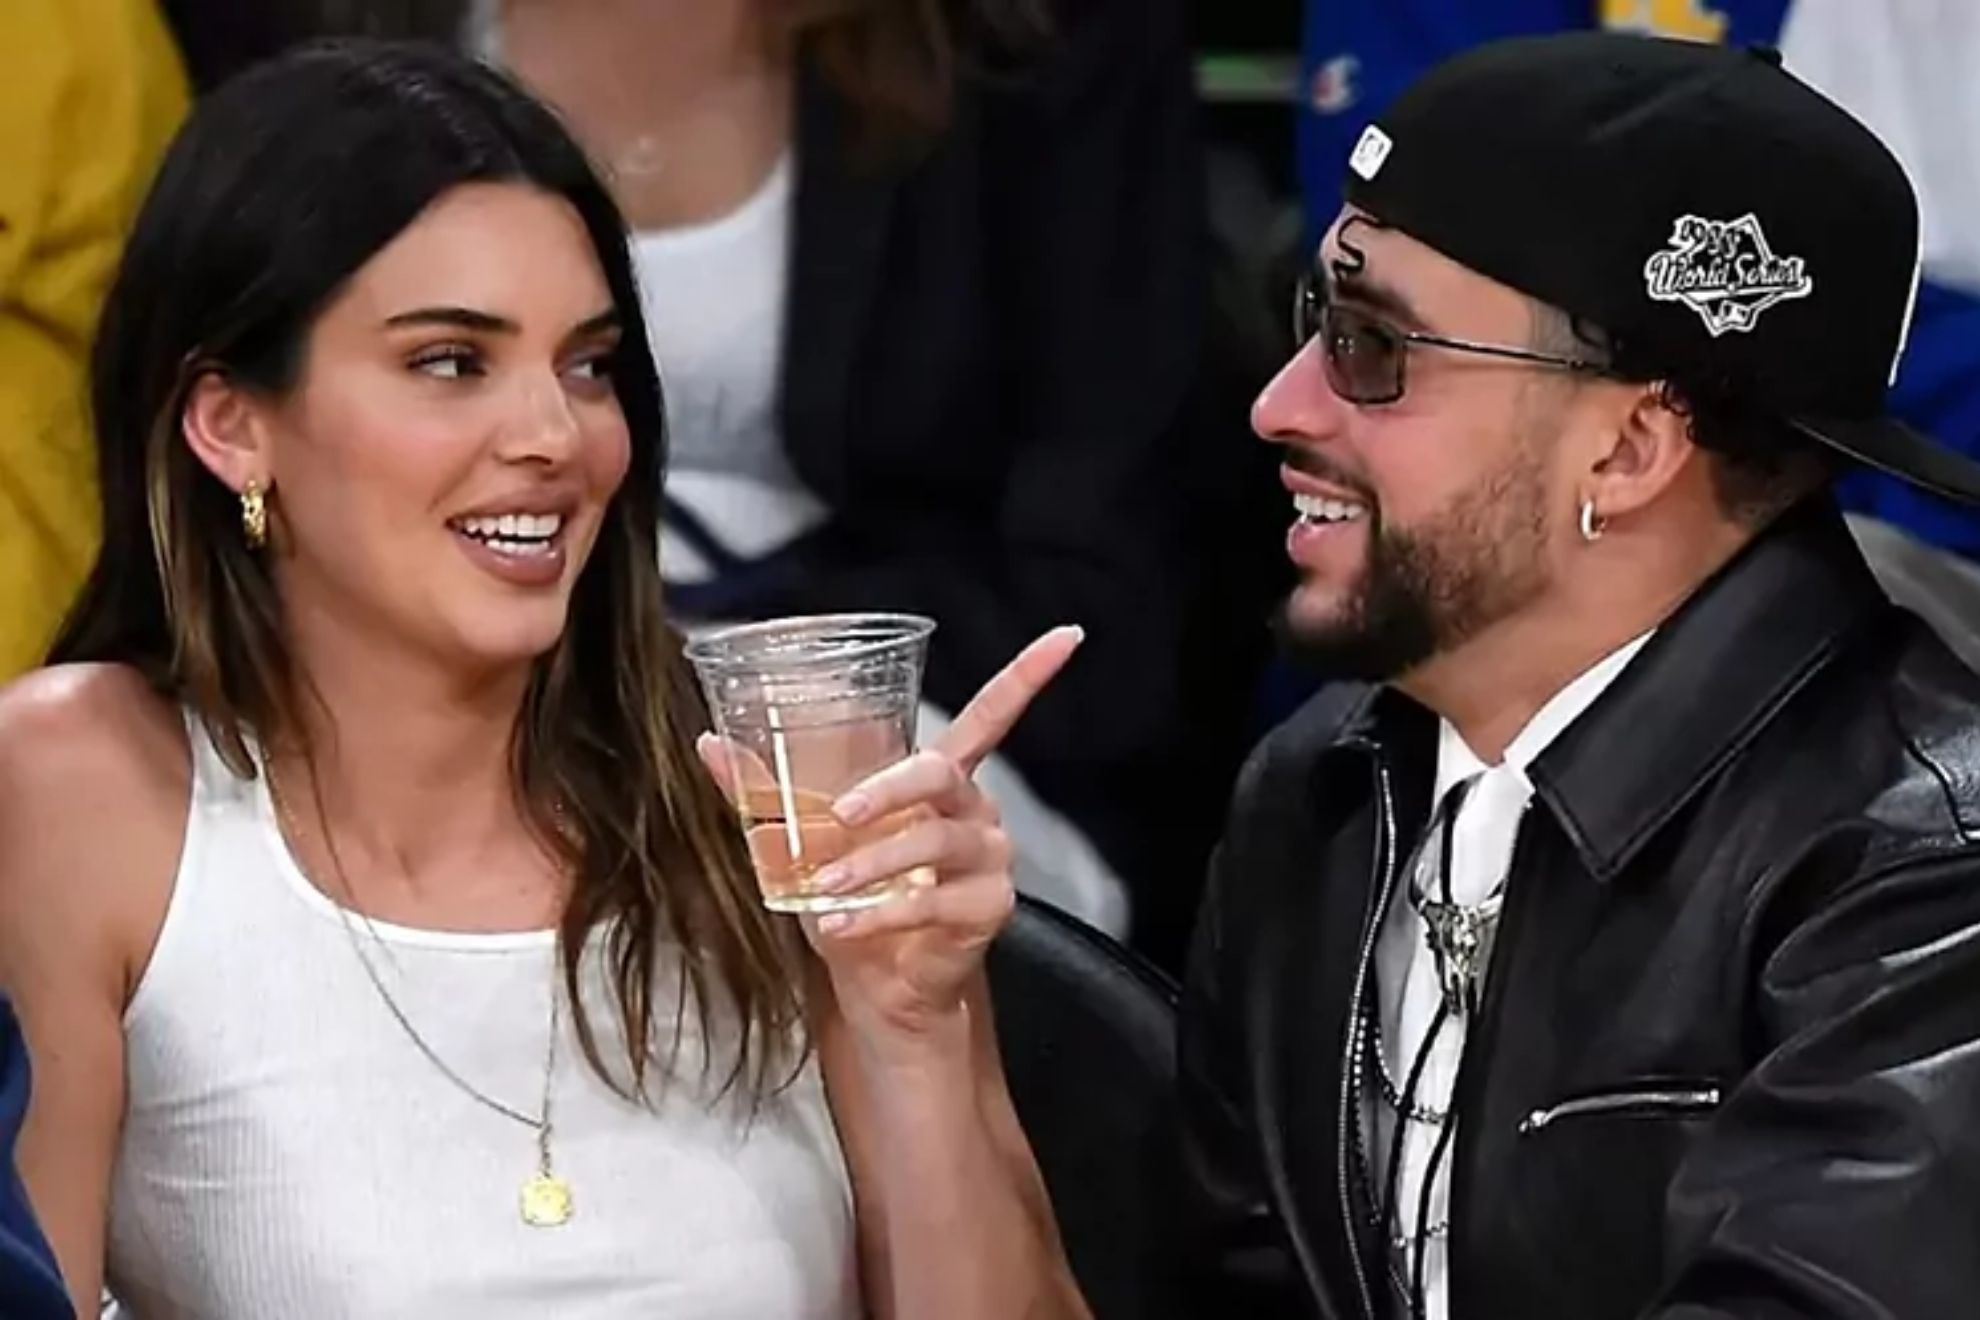 Bad Bunny hints in a song that he had sex with Kendall Jenner in another Kardashians house